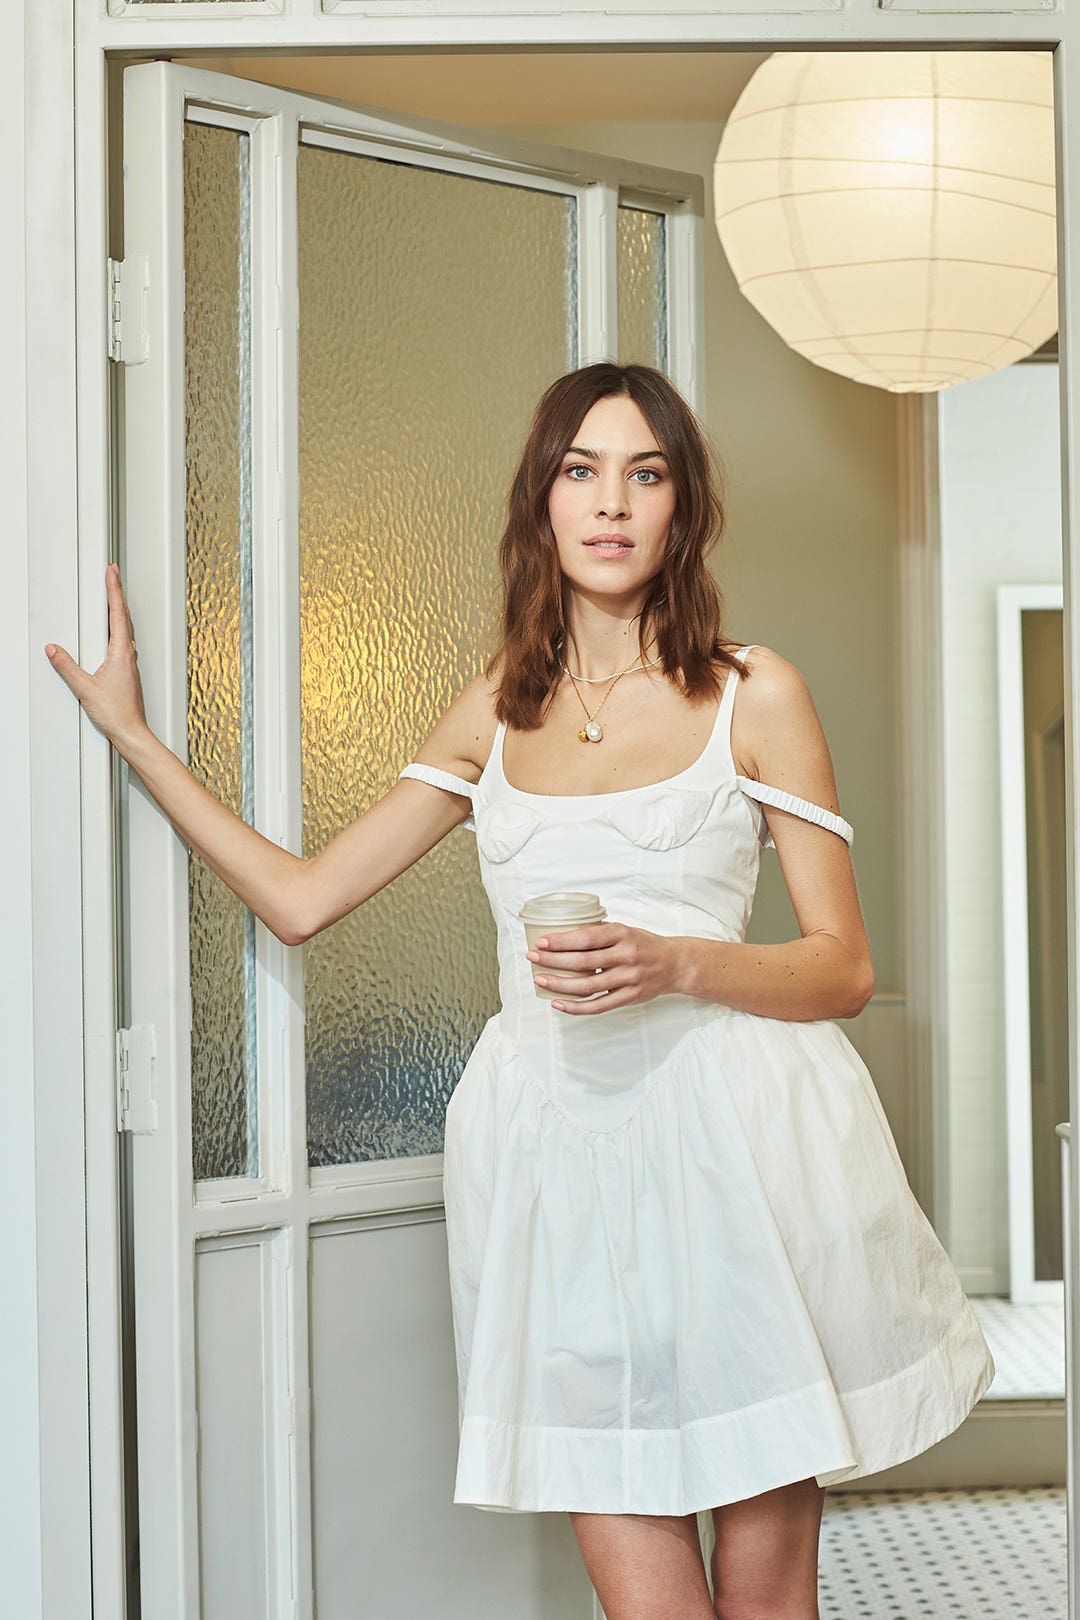 Alexa Chung’s Latest Kitchen Love Is From One of Our Favorite British ...